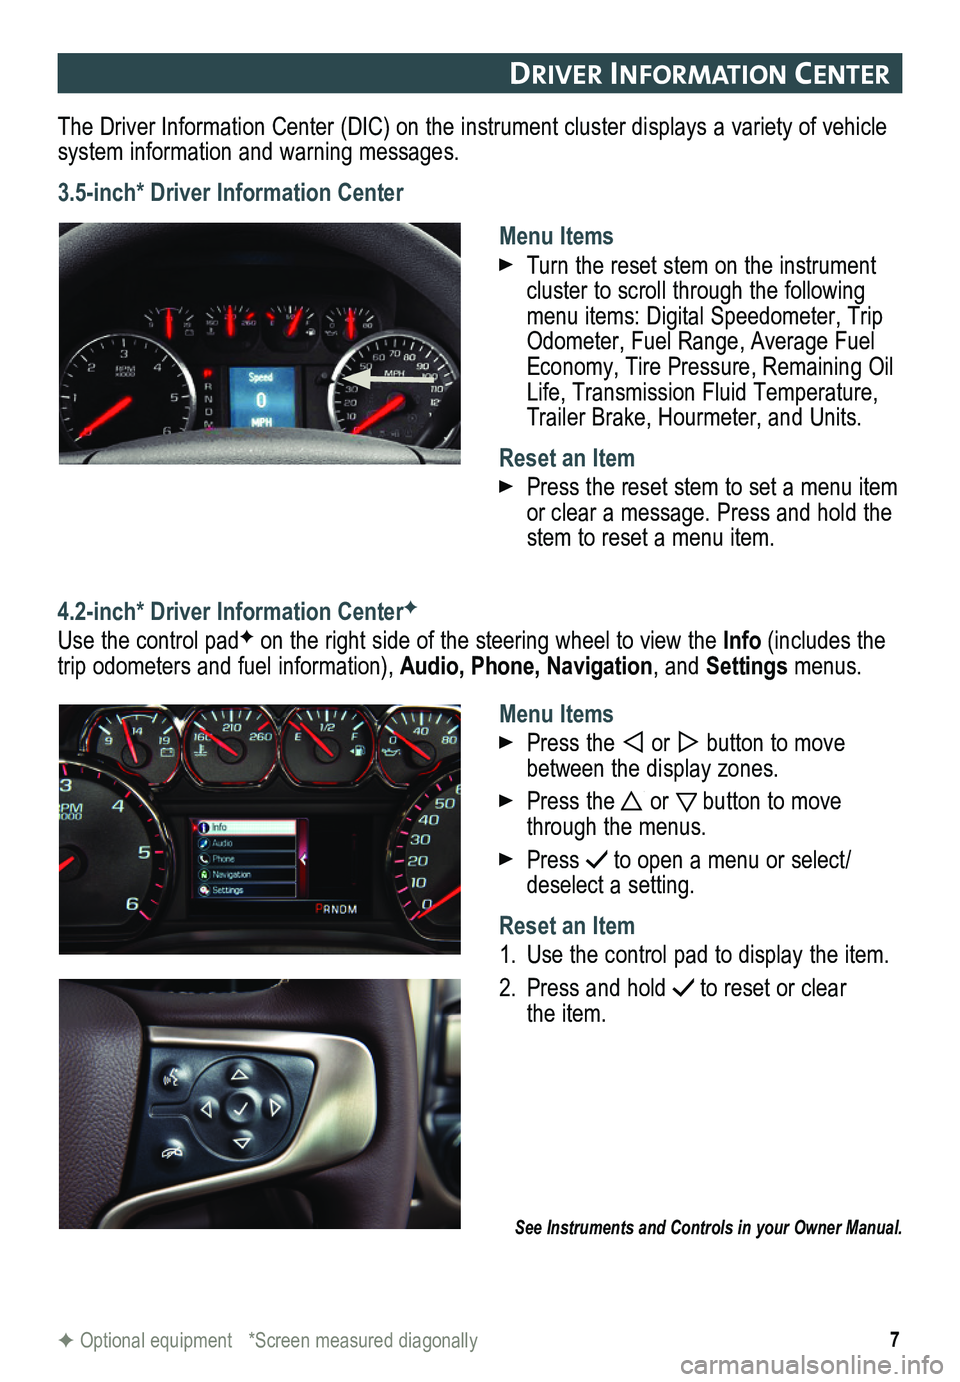 GMC SIERRA 2015  Get To Know Guide 7
DrIver In Format Ion center
The Driver Information Center (DIC) on the instrument cluster displays a variety of vehicle system information and warning messages.
3.5-inch* Driver Information Center
M